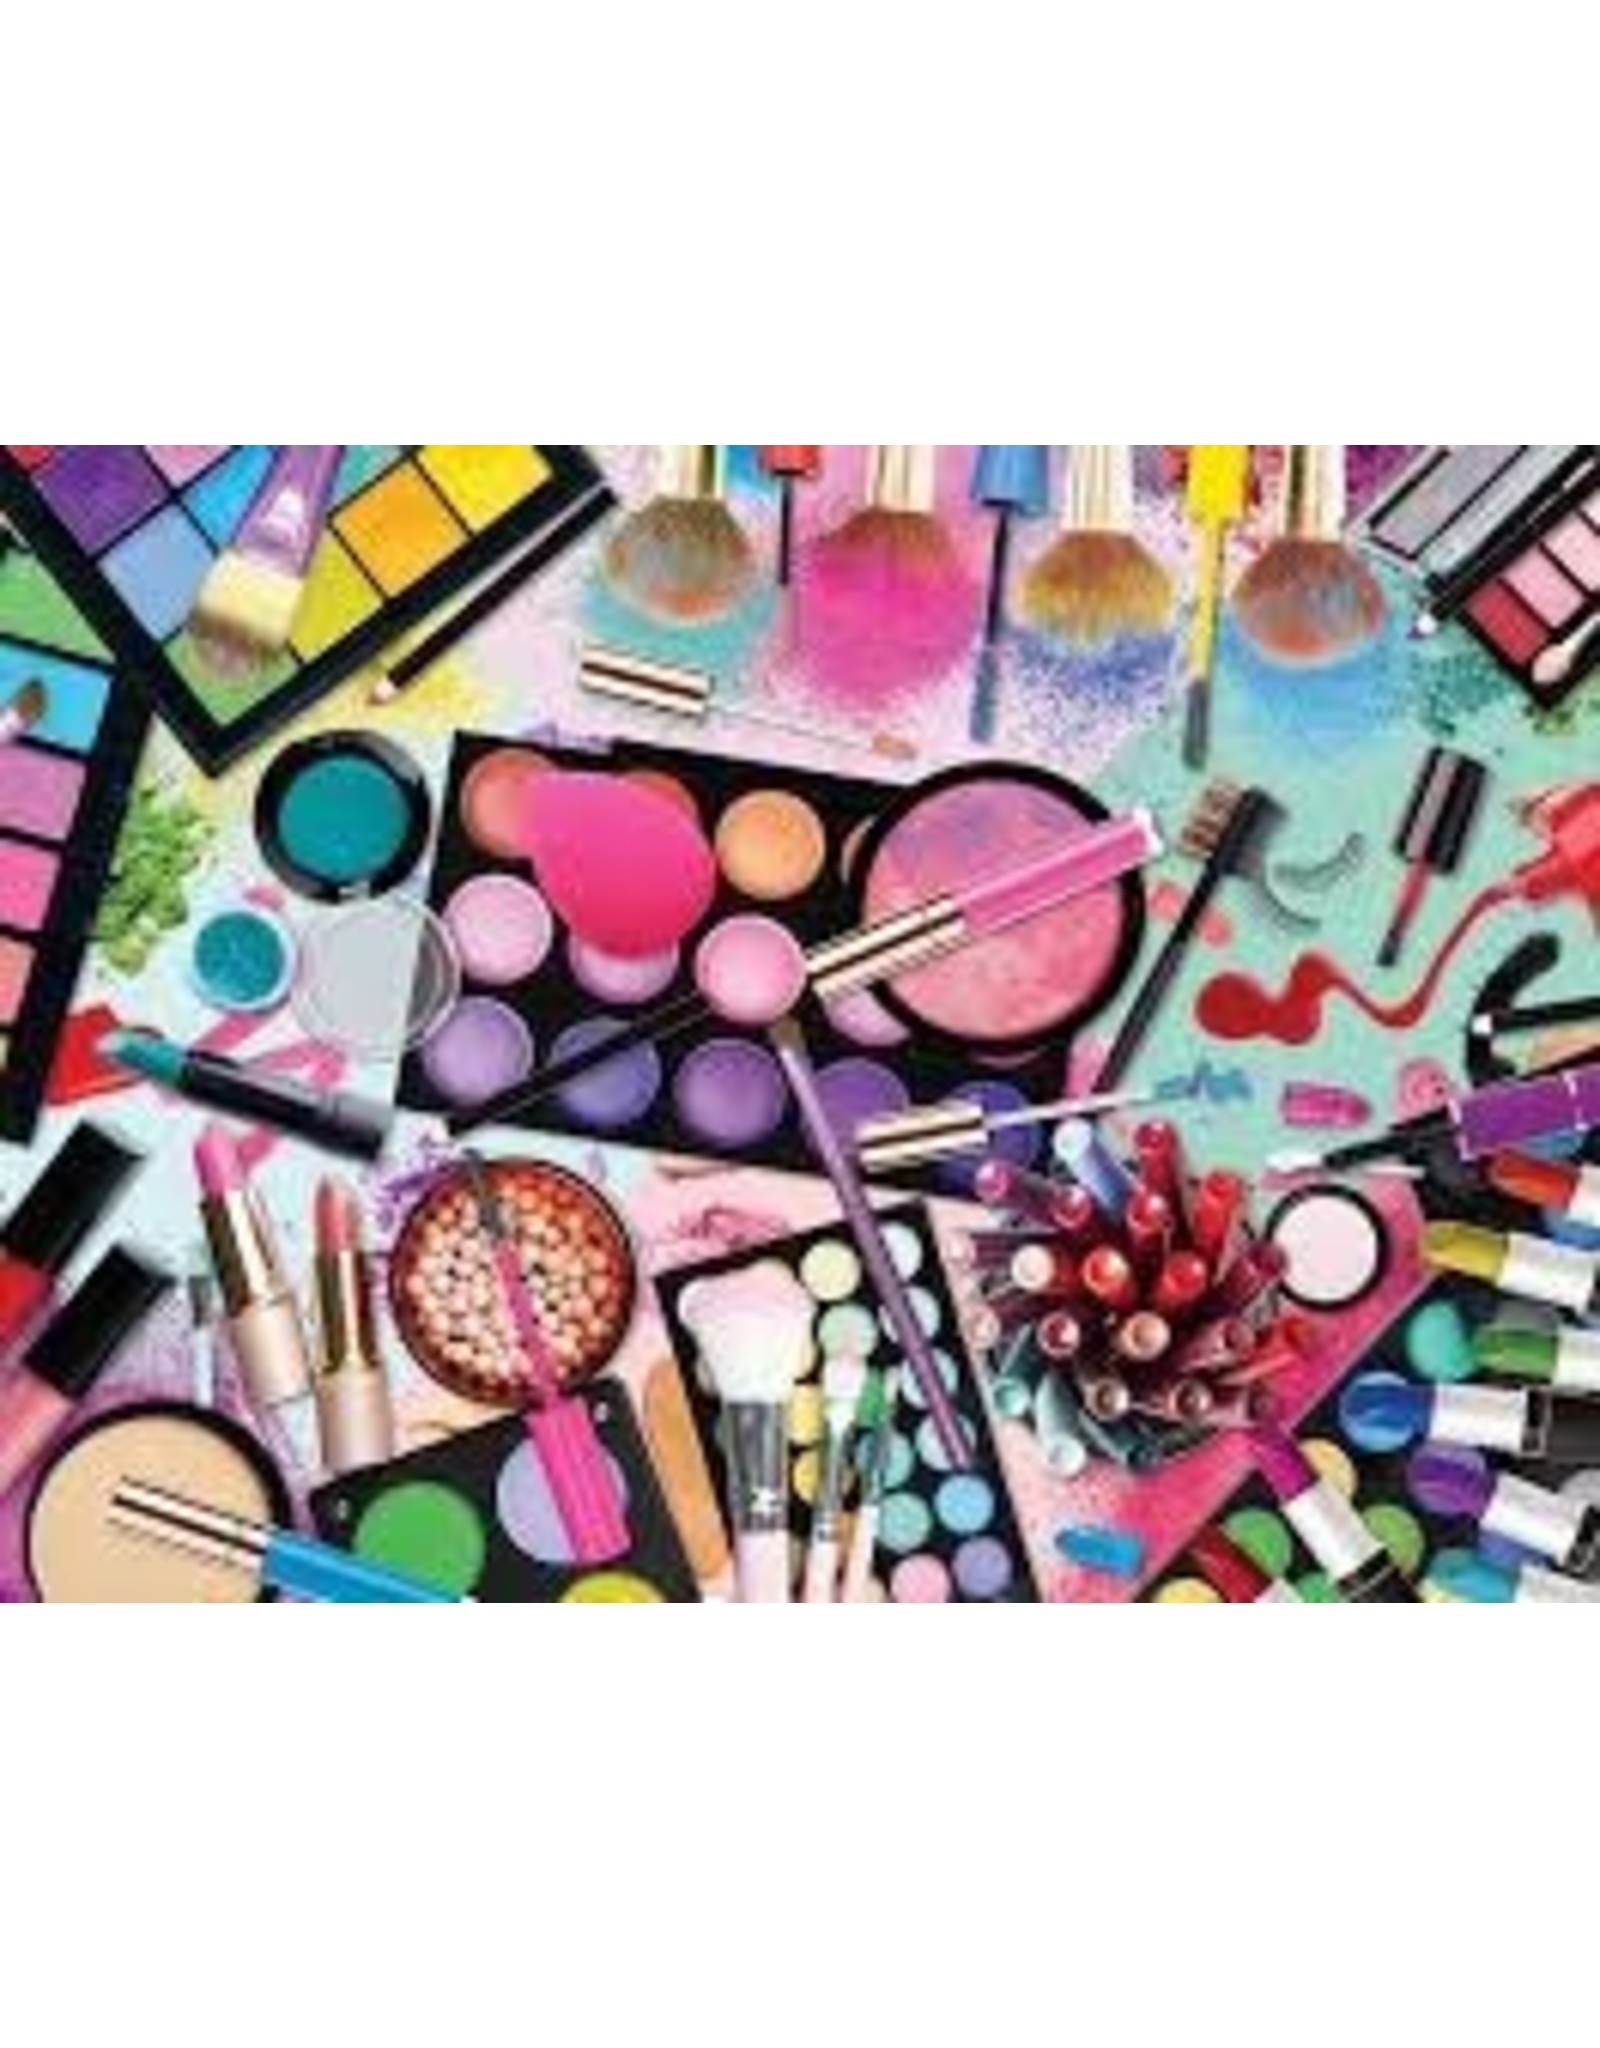 Makeup Palette In Tin Box 1000 pc Jigsaw Puzzle